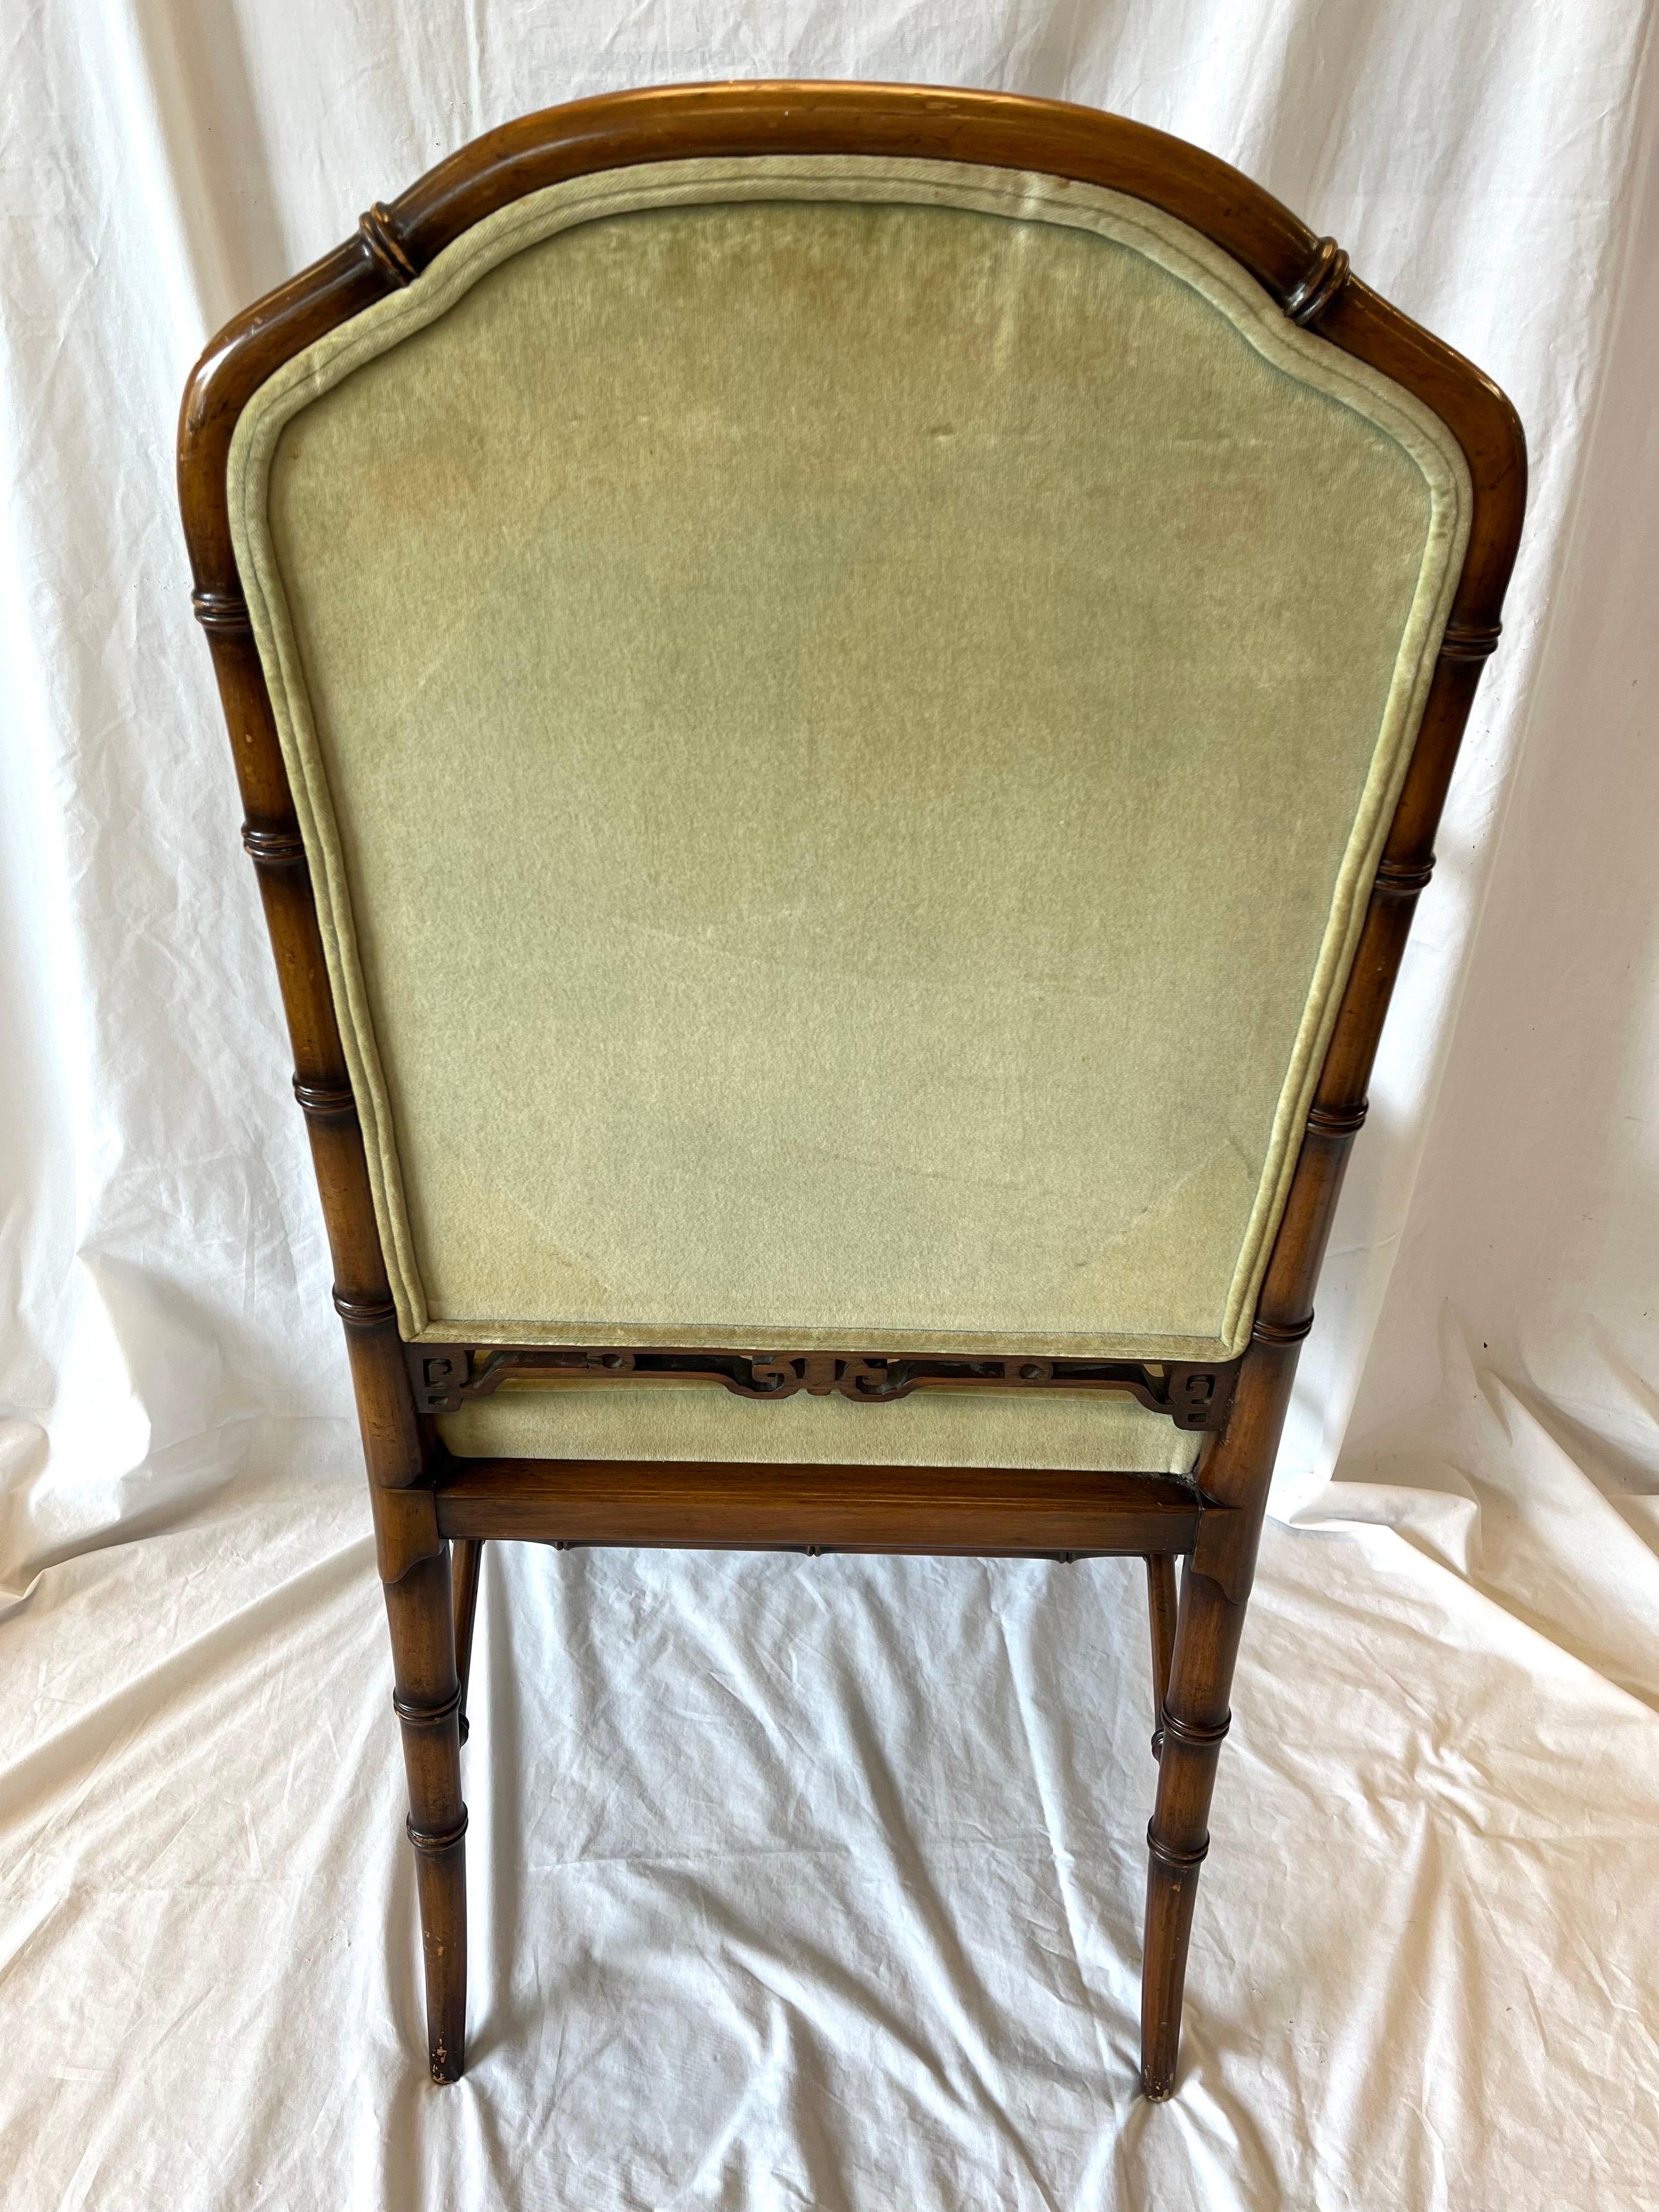 Vintage Faux Bamboo Chinoiserie Style Upholstered Fretwork Armchair Desk Chair 4